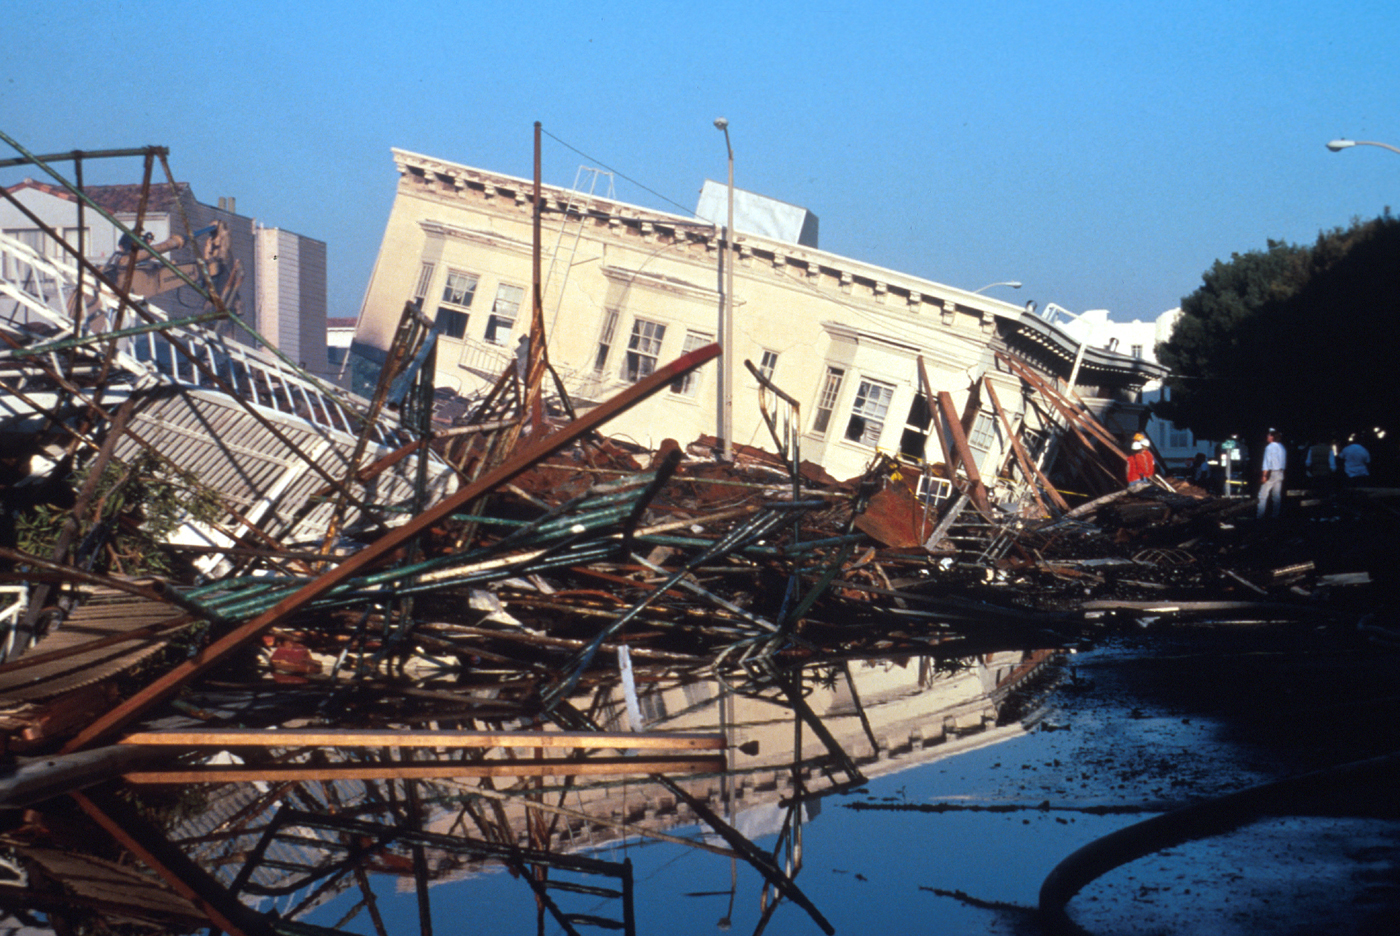 The Marina District of San Francisco was hit hard by the Loma Prieta earthquake.